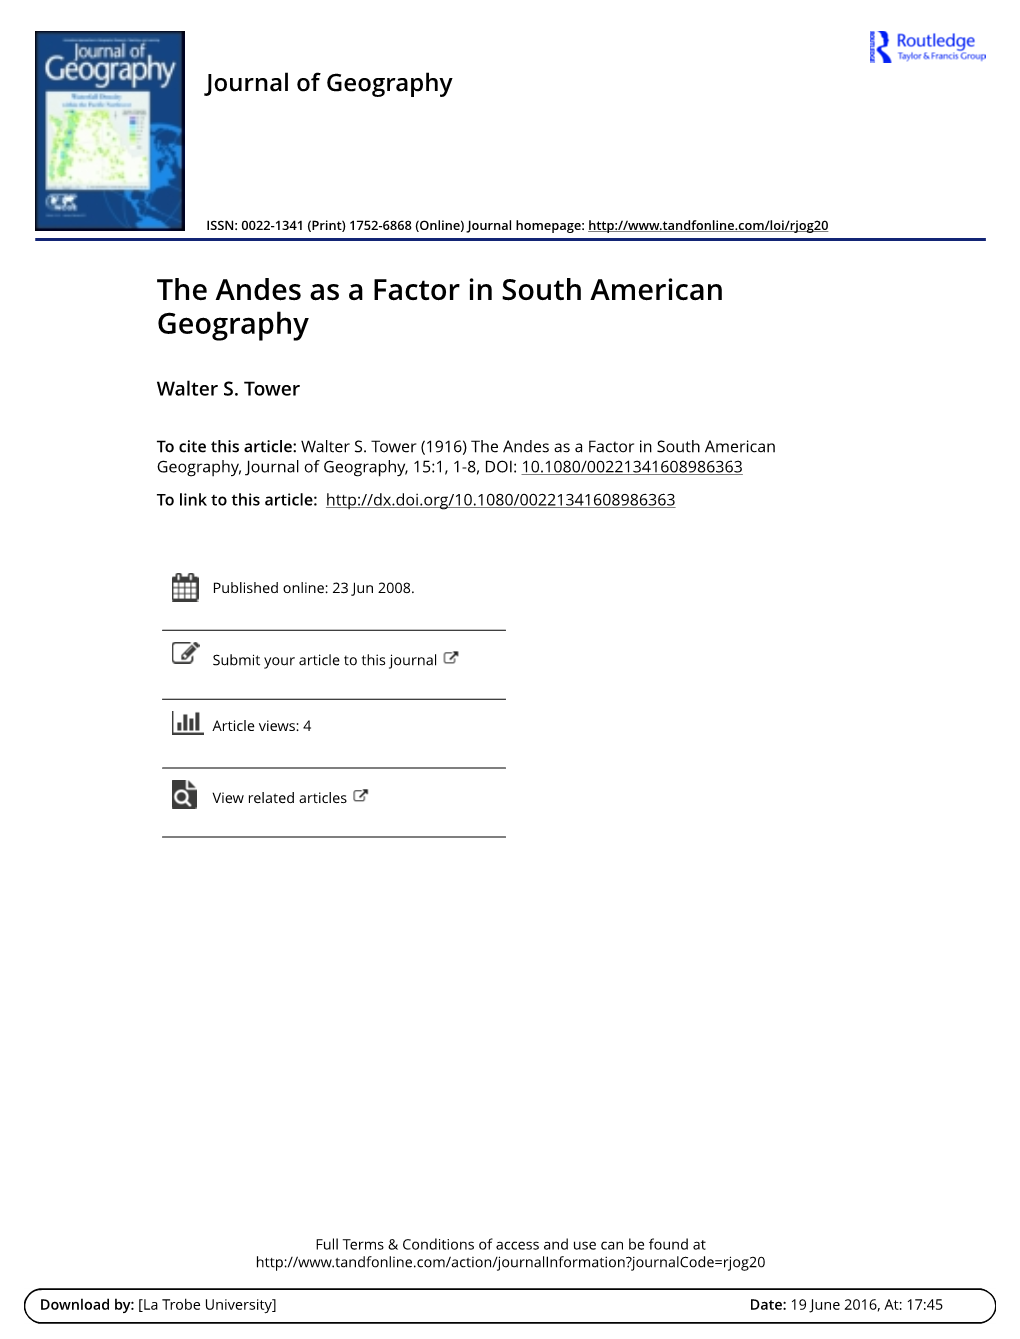 The Andes As a Factor in South American Geography